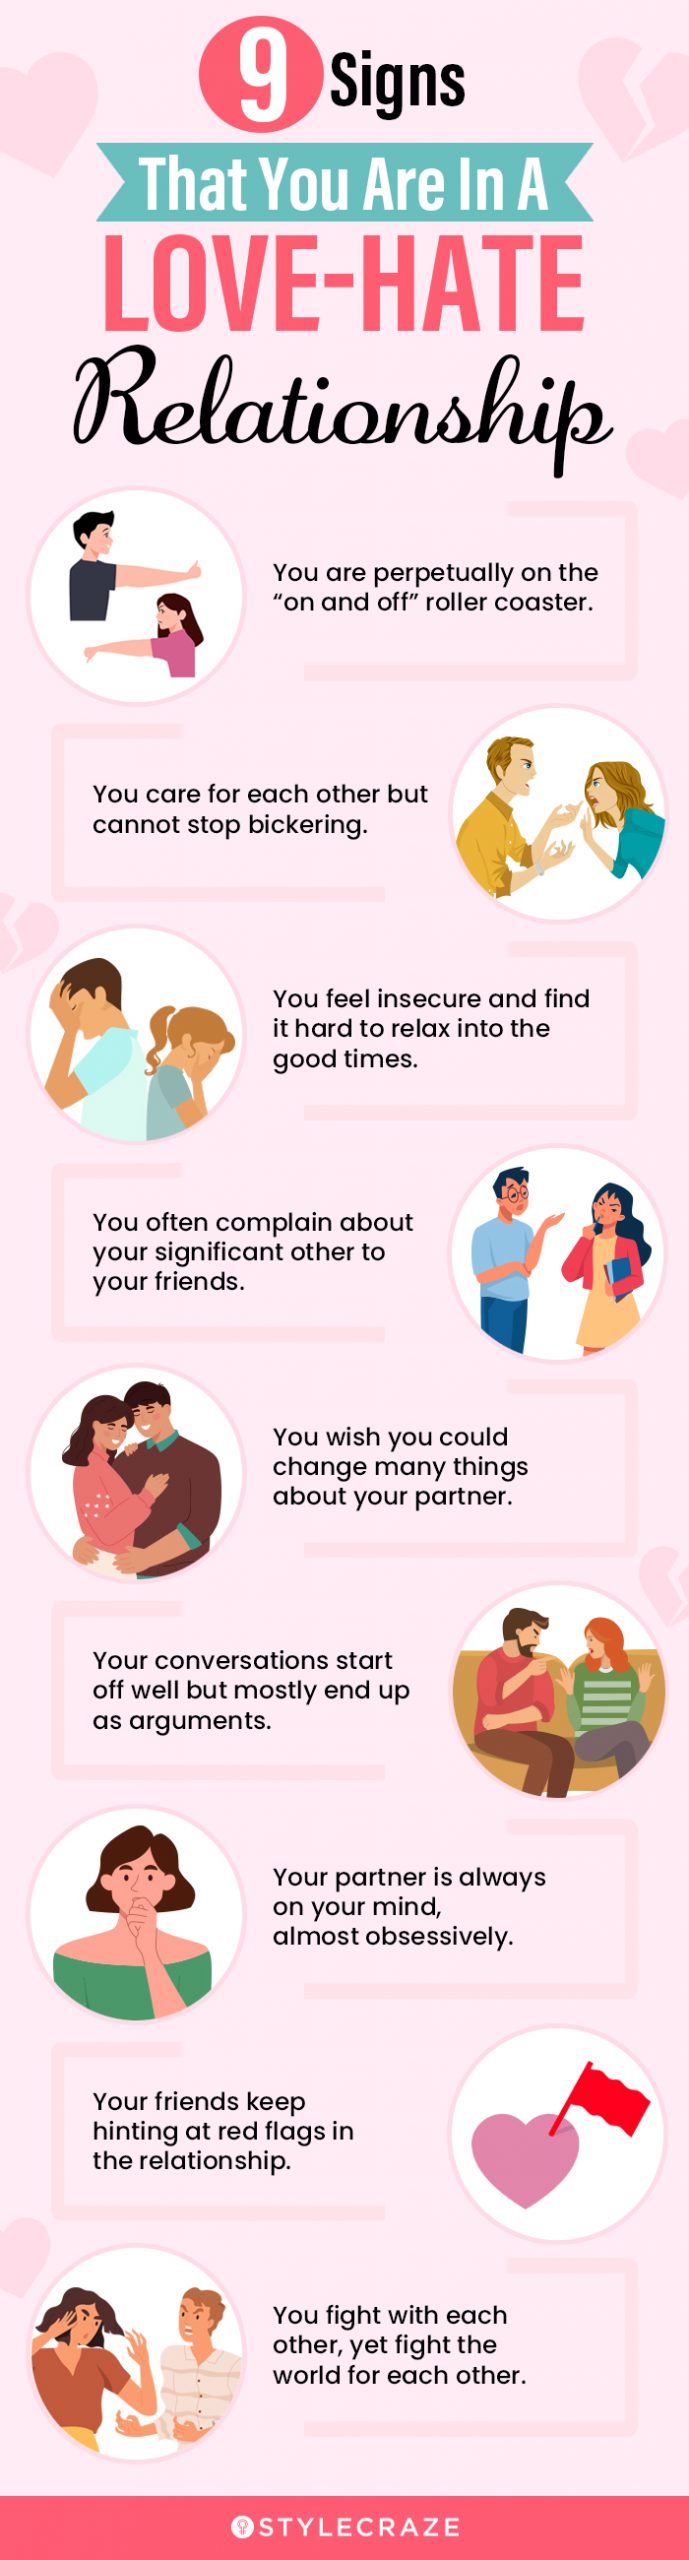 9 signs that you are in a love-hate releationship [infographic]